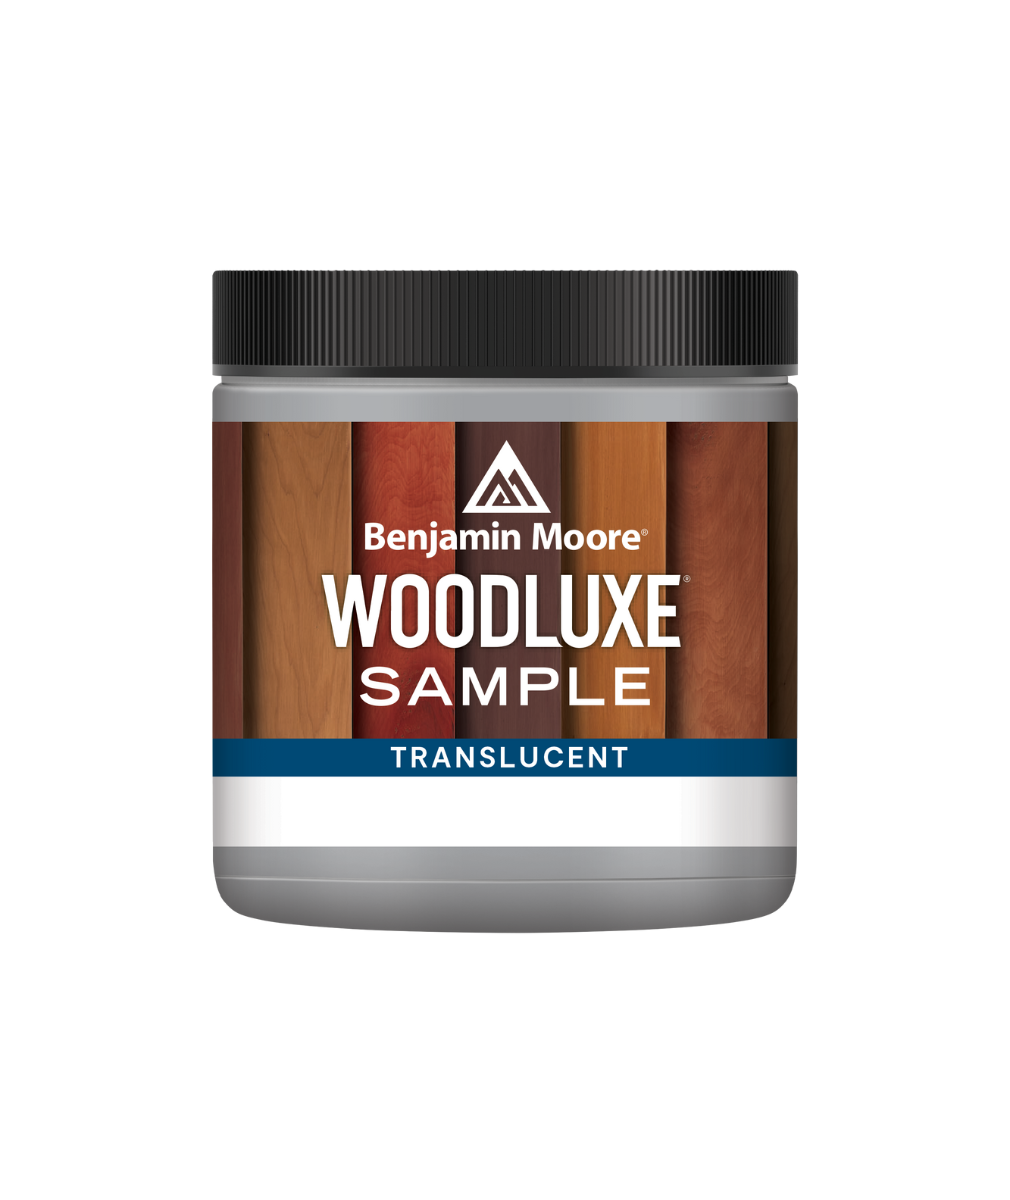 Benjamin Moore Woodluxe® Water-Based Translucent Exterior Stain Half-Pint Sample available at JC Licht.